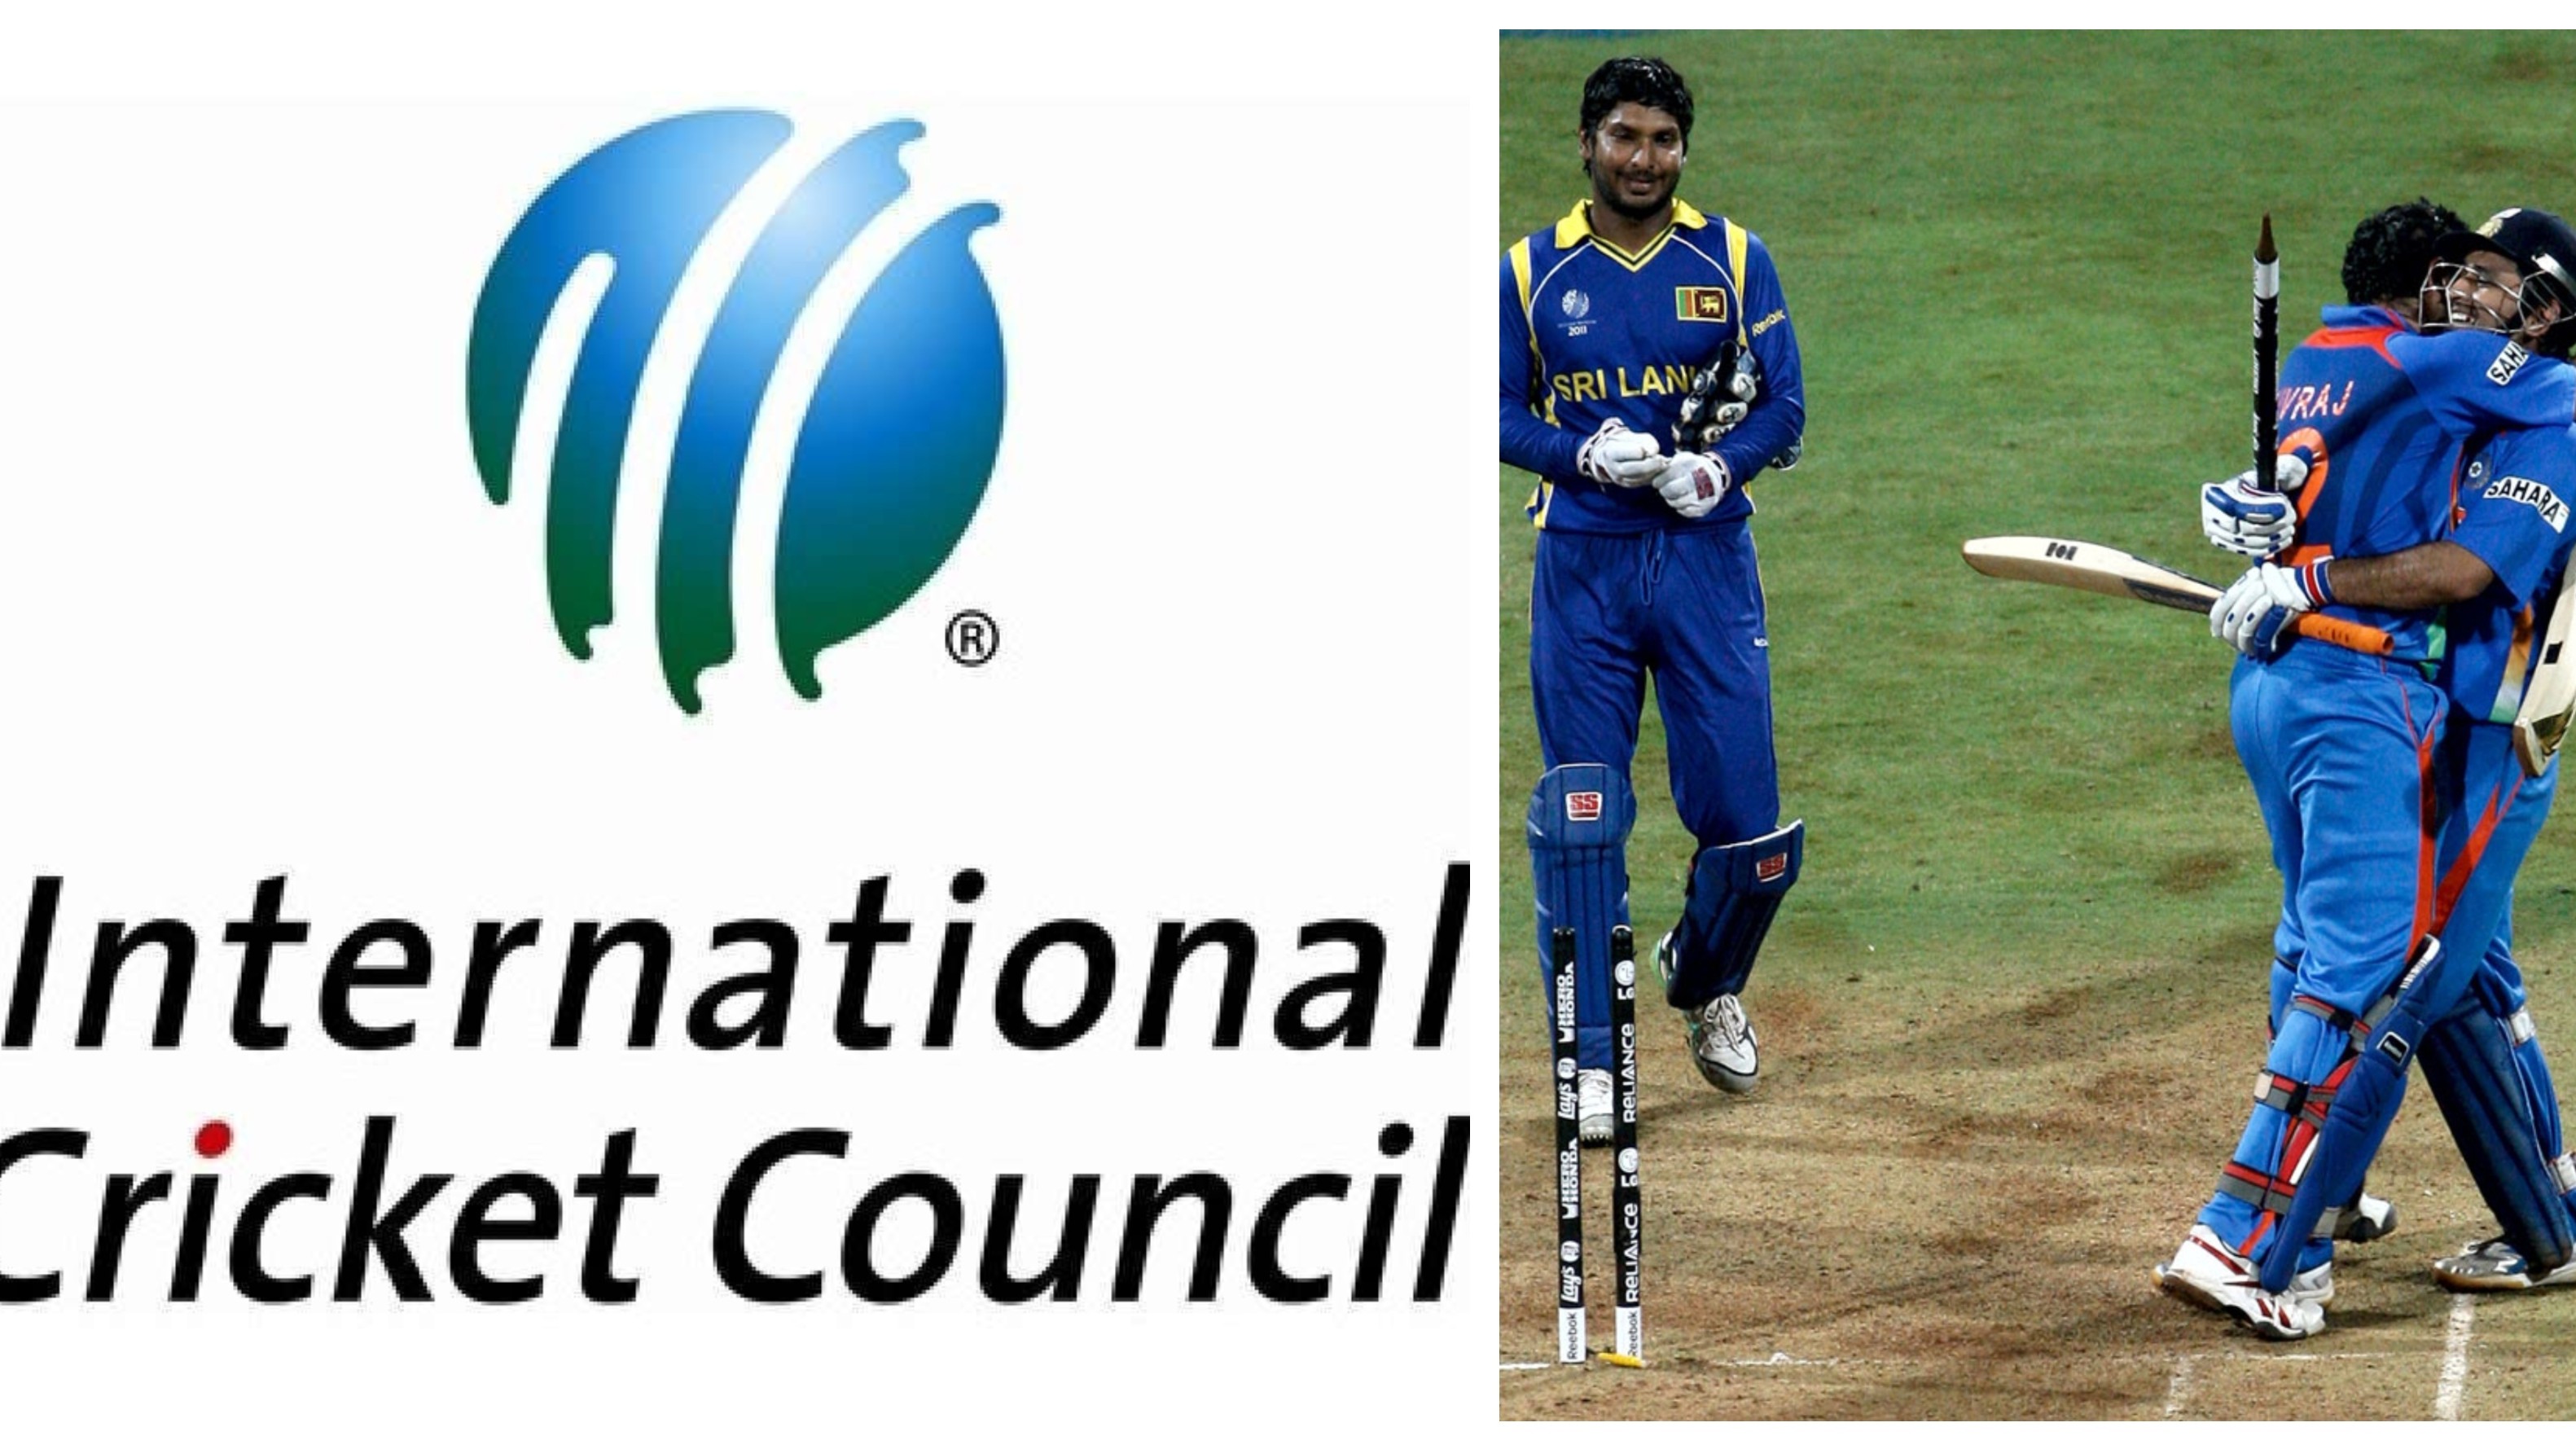 ‘No reason to doubt the integrity of 2011 World Cup final’: ICC ACU head